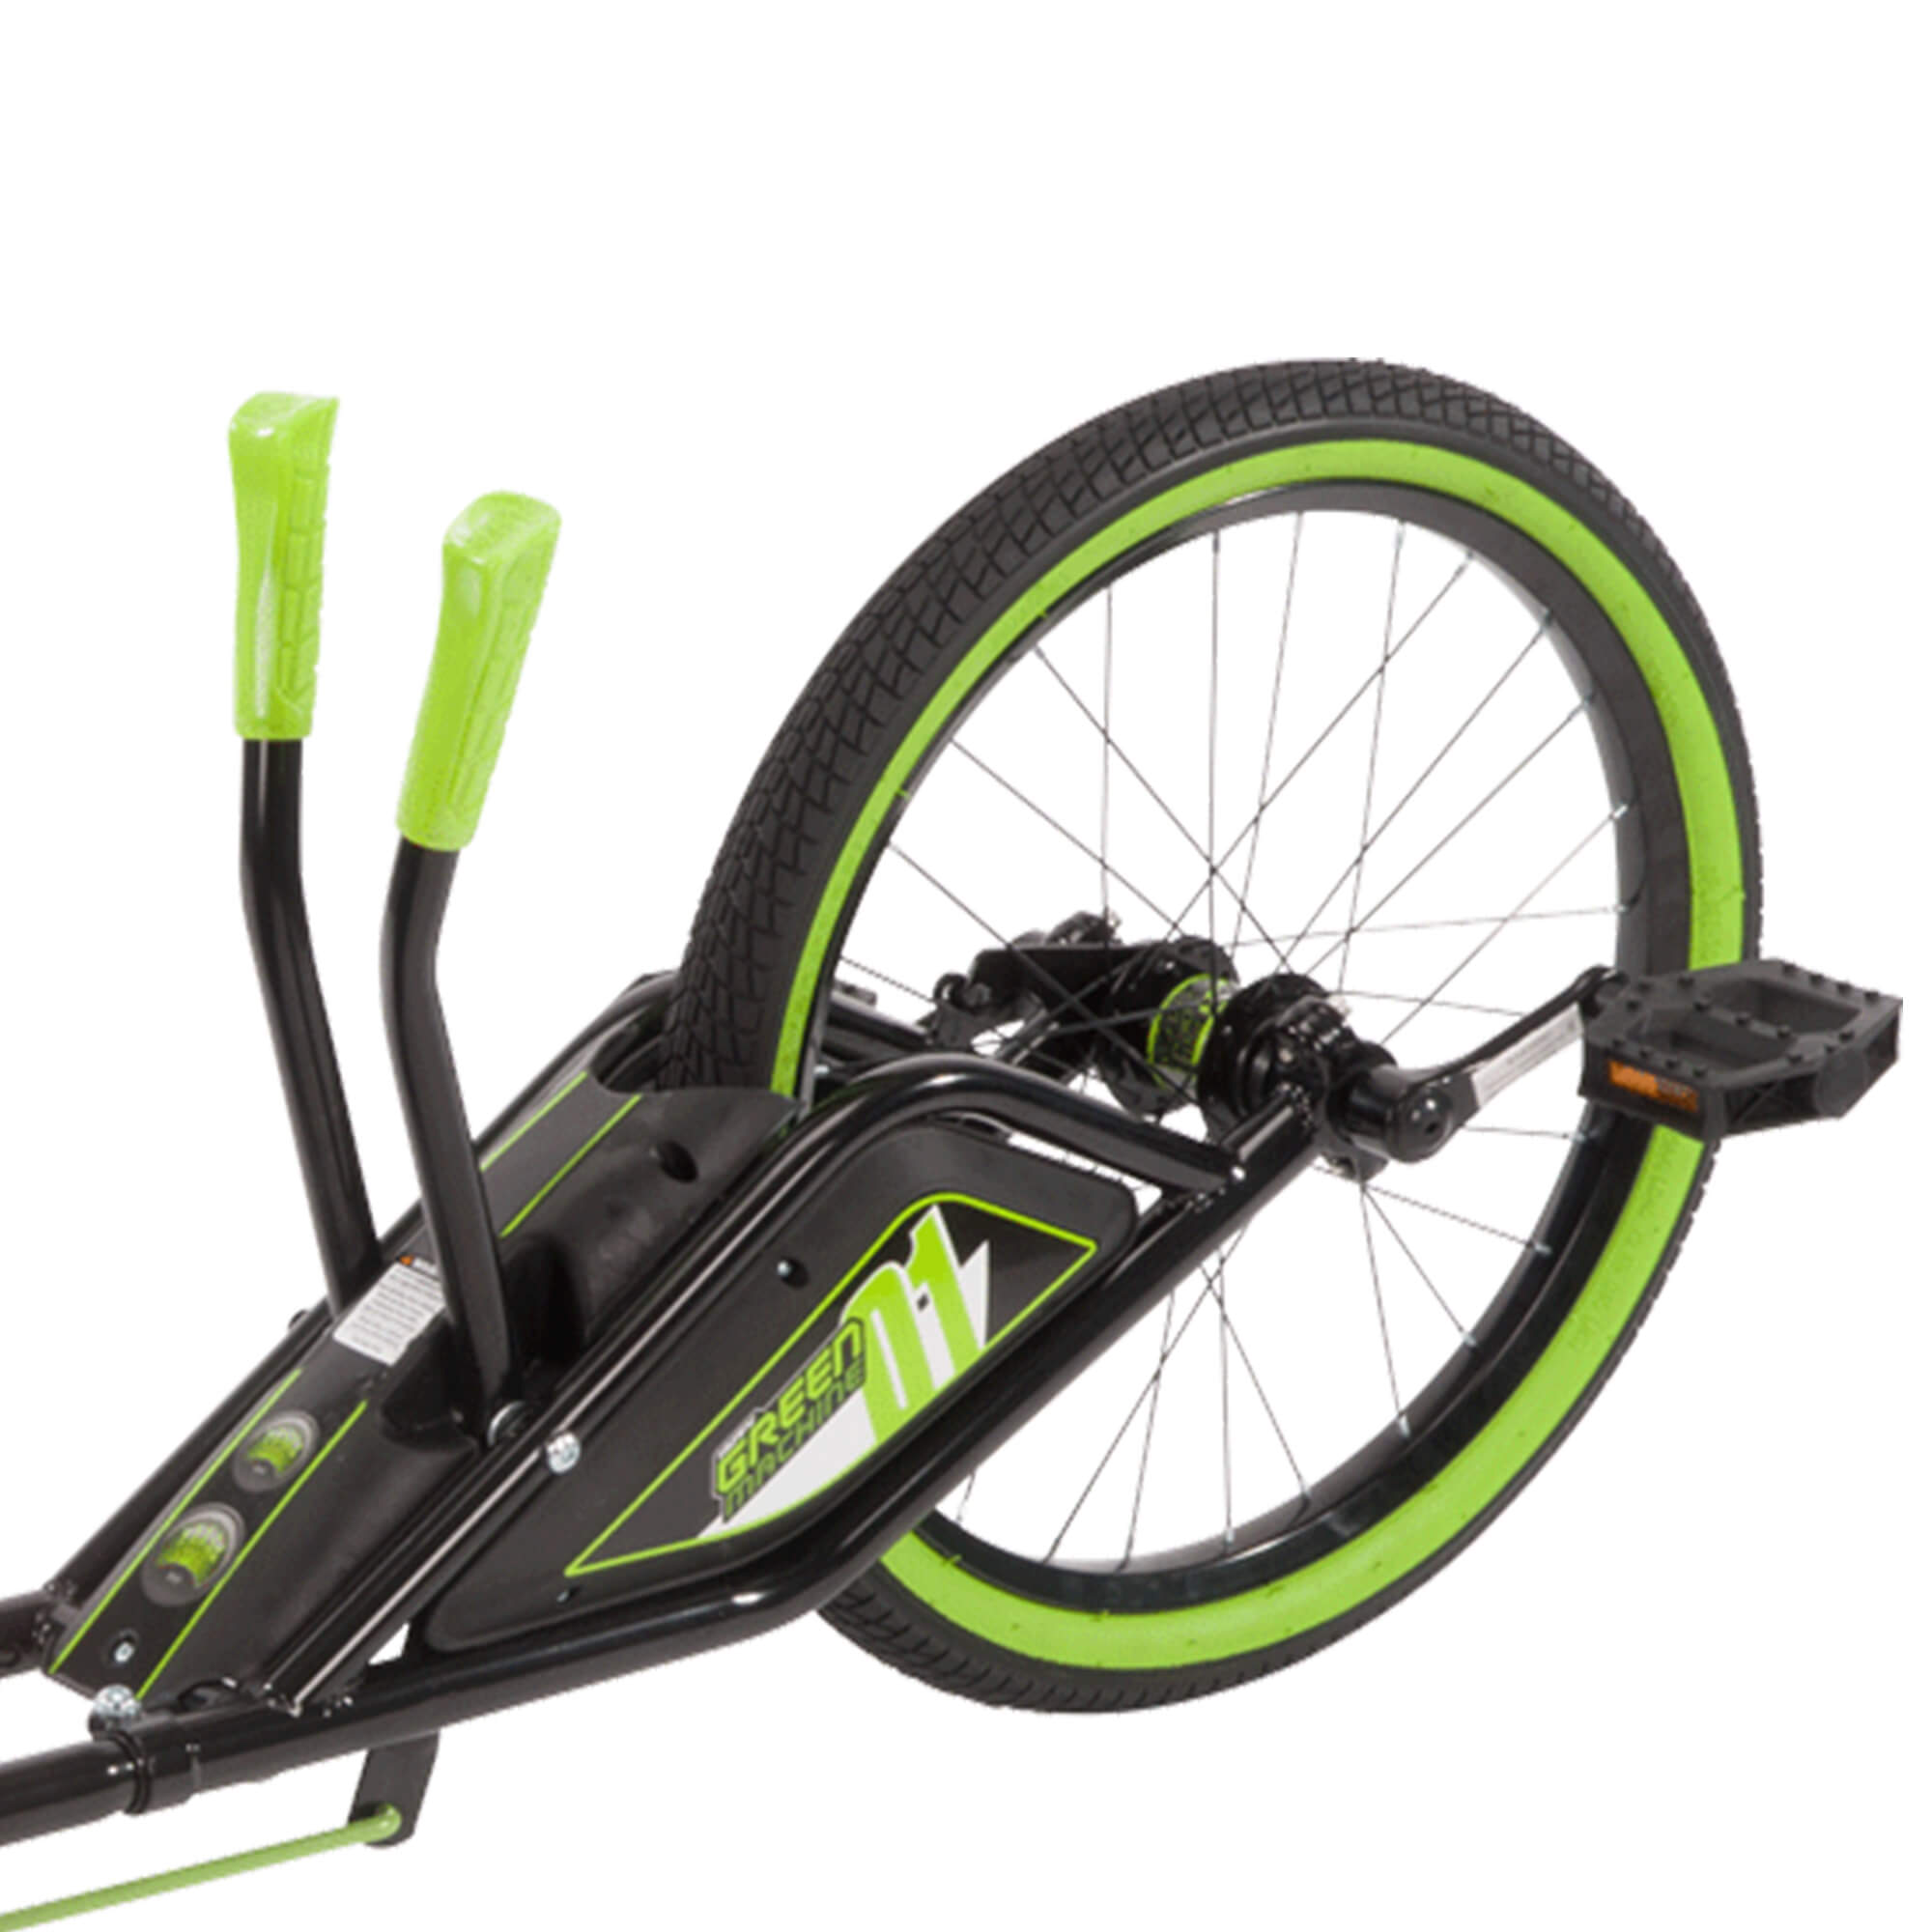 Huffy Green Machine RT 20-Inch 3-Wheel Tricycle in Green and Black - image 3 of 4